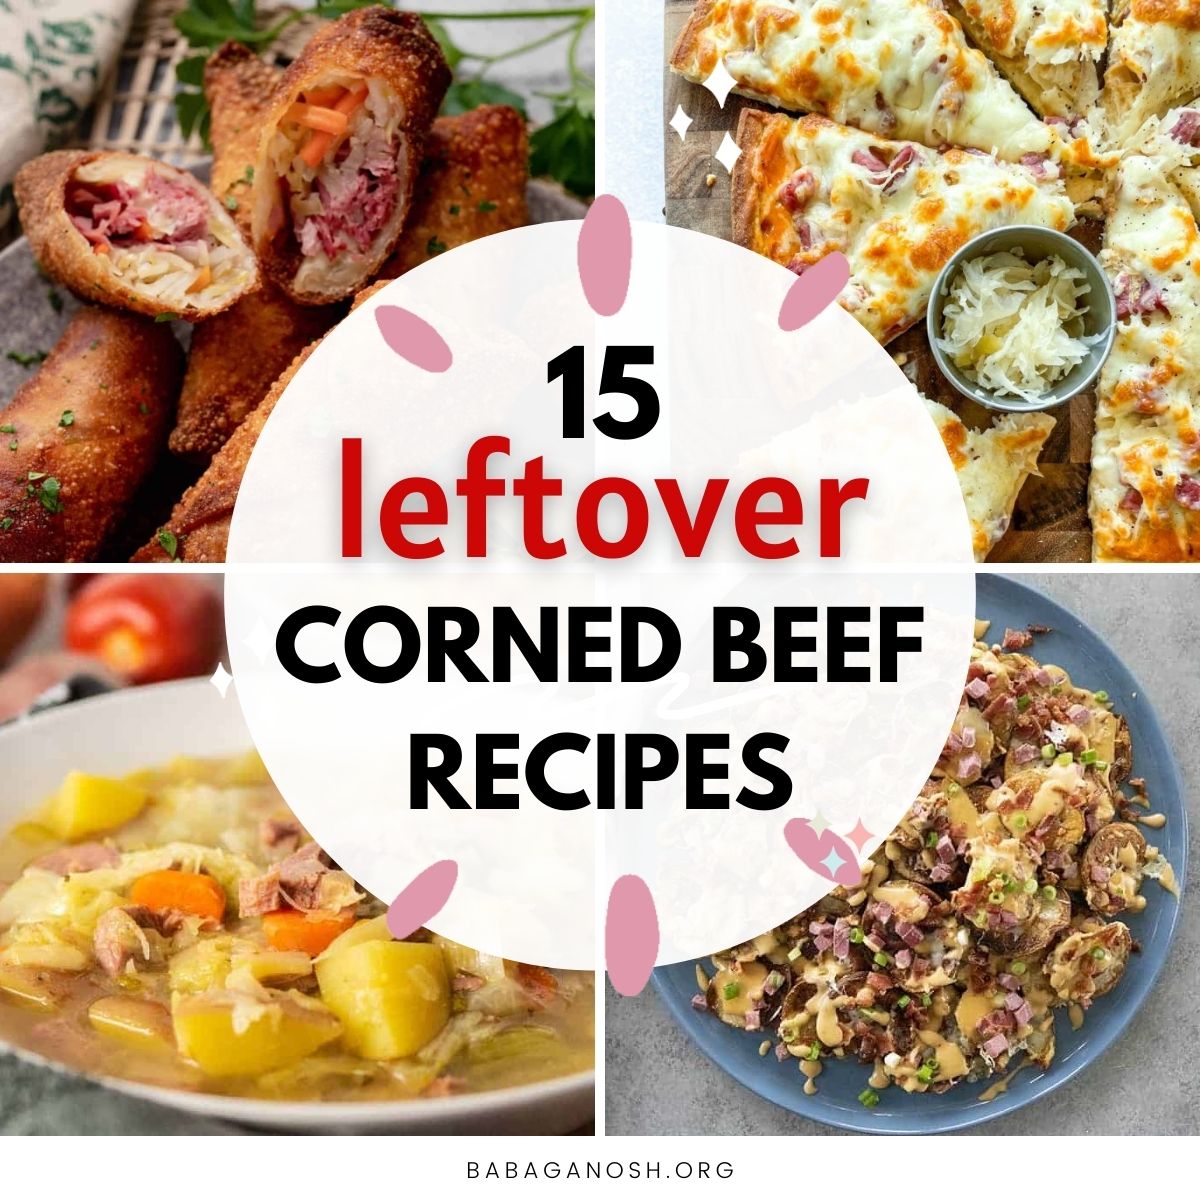 Image with text: 15 leftover corned beef recipes